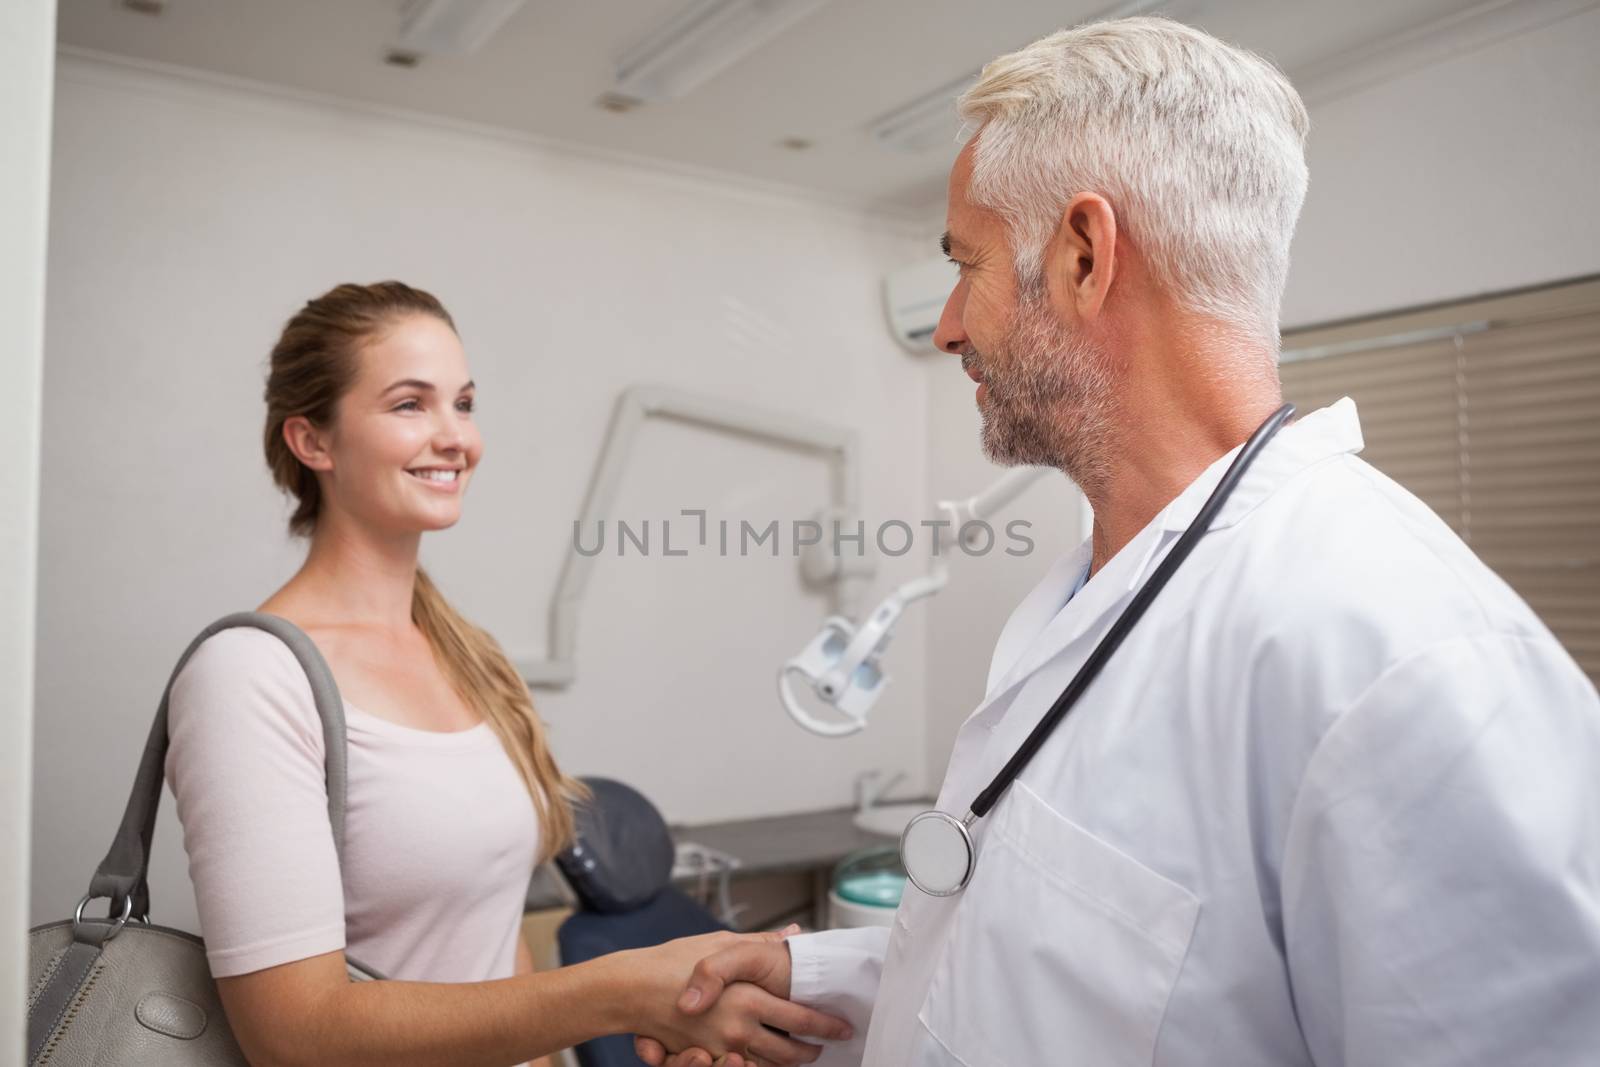 Dentist shaking hands with his patient by Wavebreakmedia